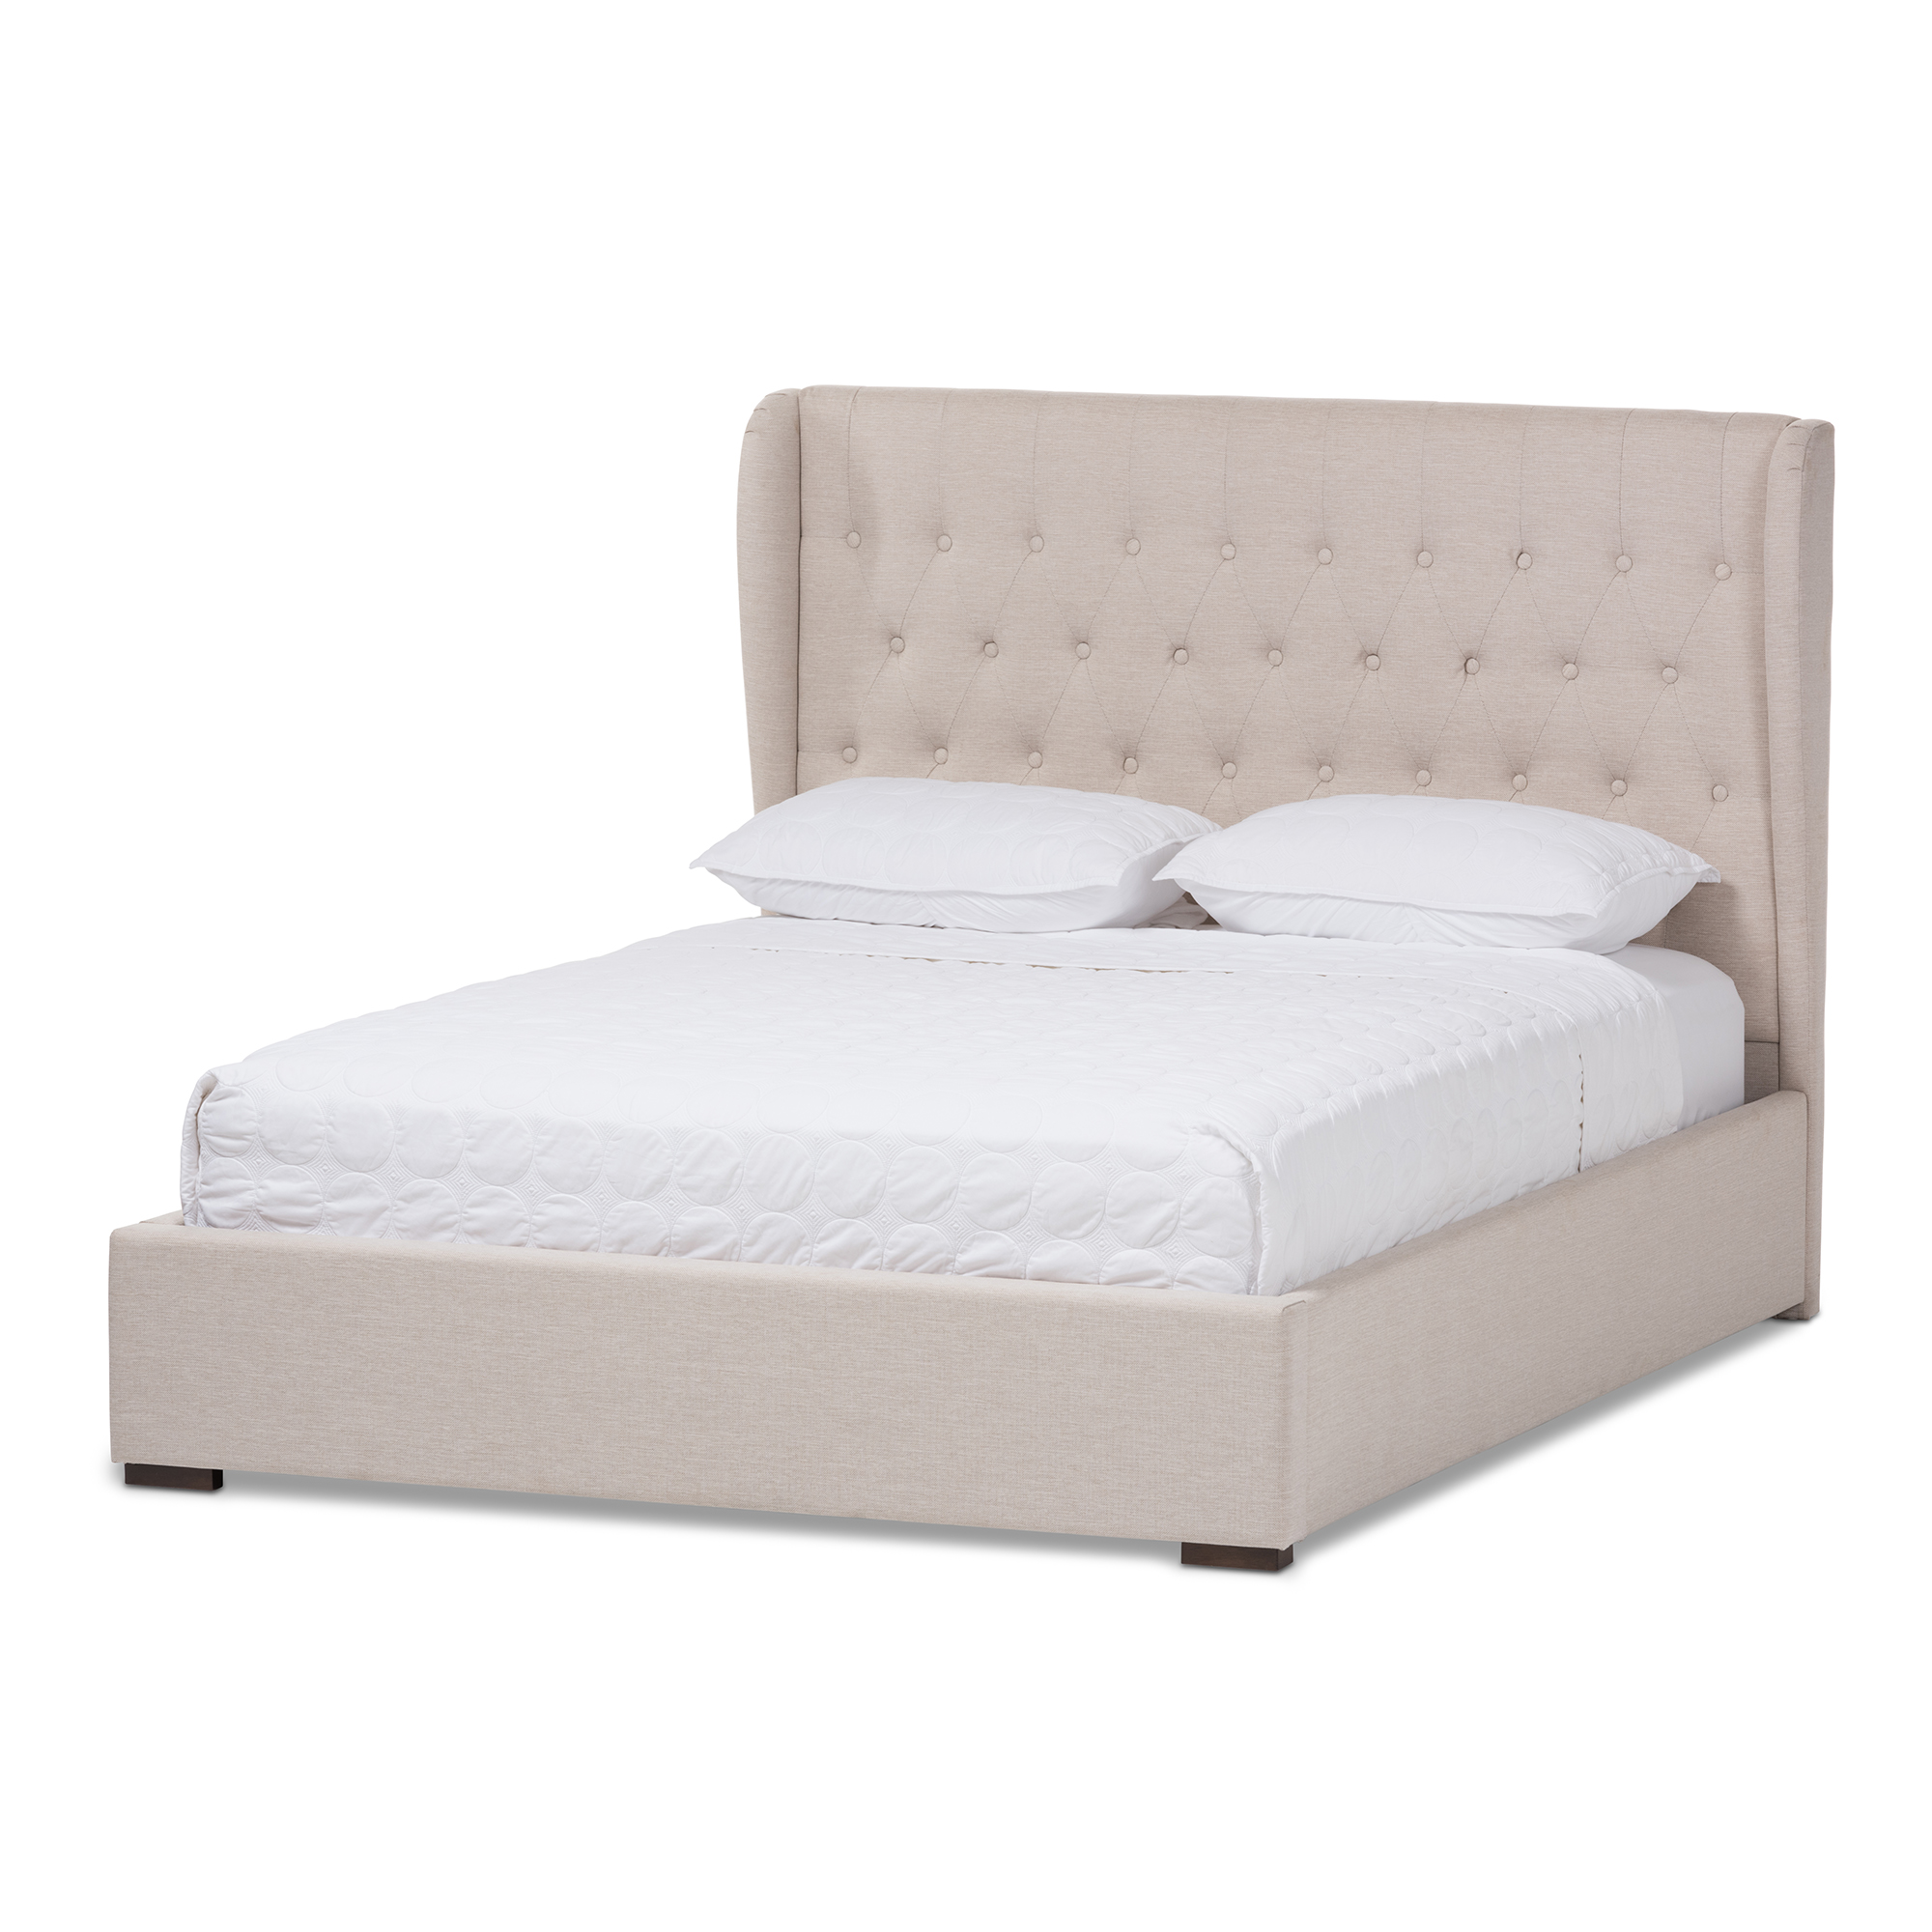 Baxton Studio Penelope Modern And, Baxton Studio Bianca Queen Platform Bed With Tufted Headboard In White